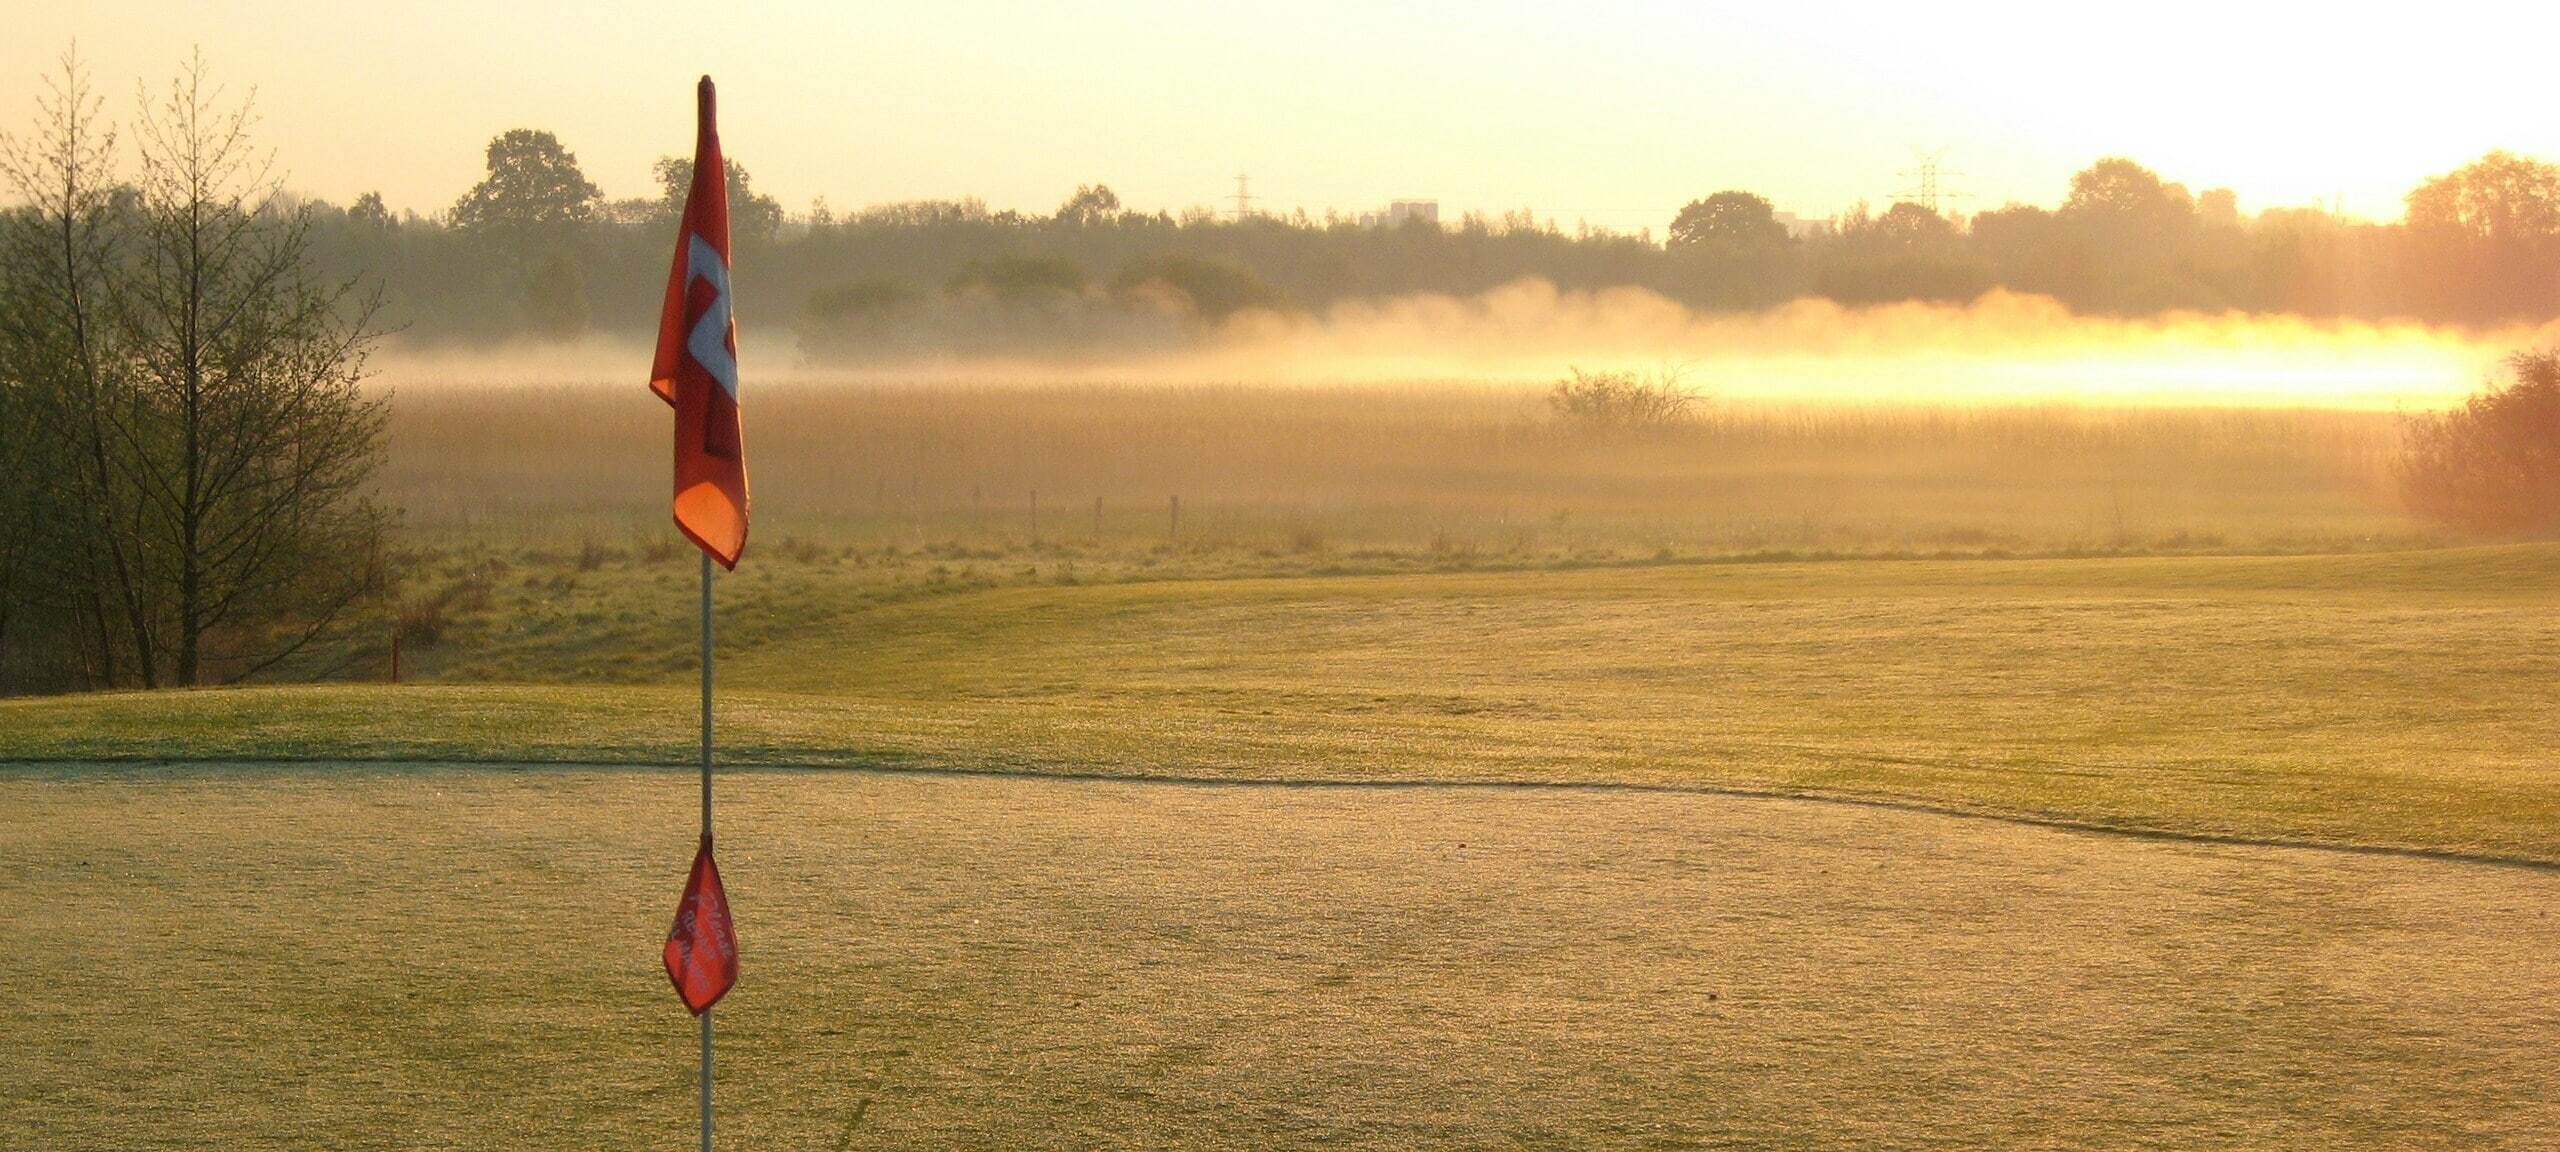 Flag on golf course with dew and fog of the early morning. Photo by Michael Jasmund on Unsplash